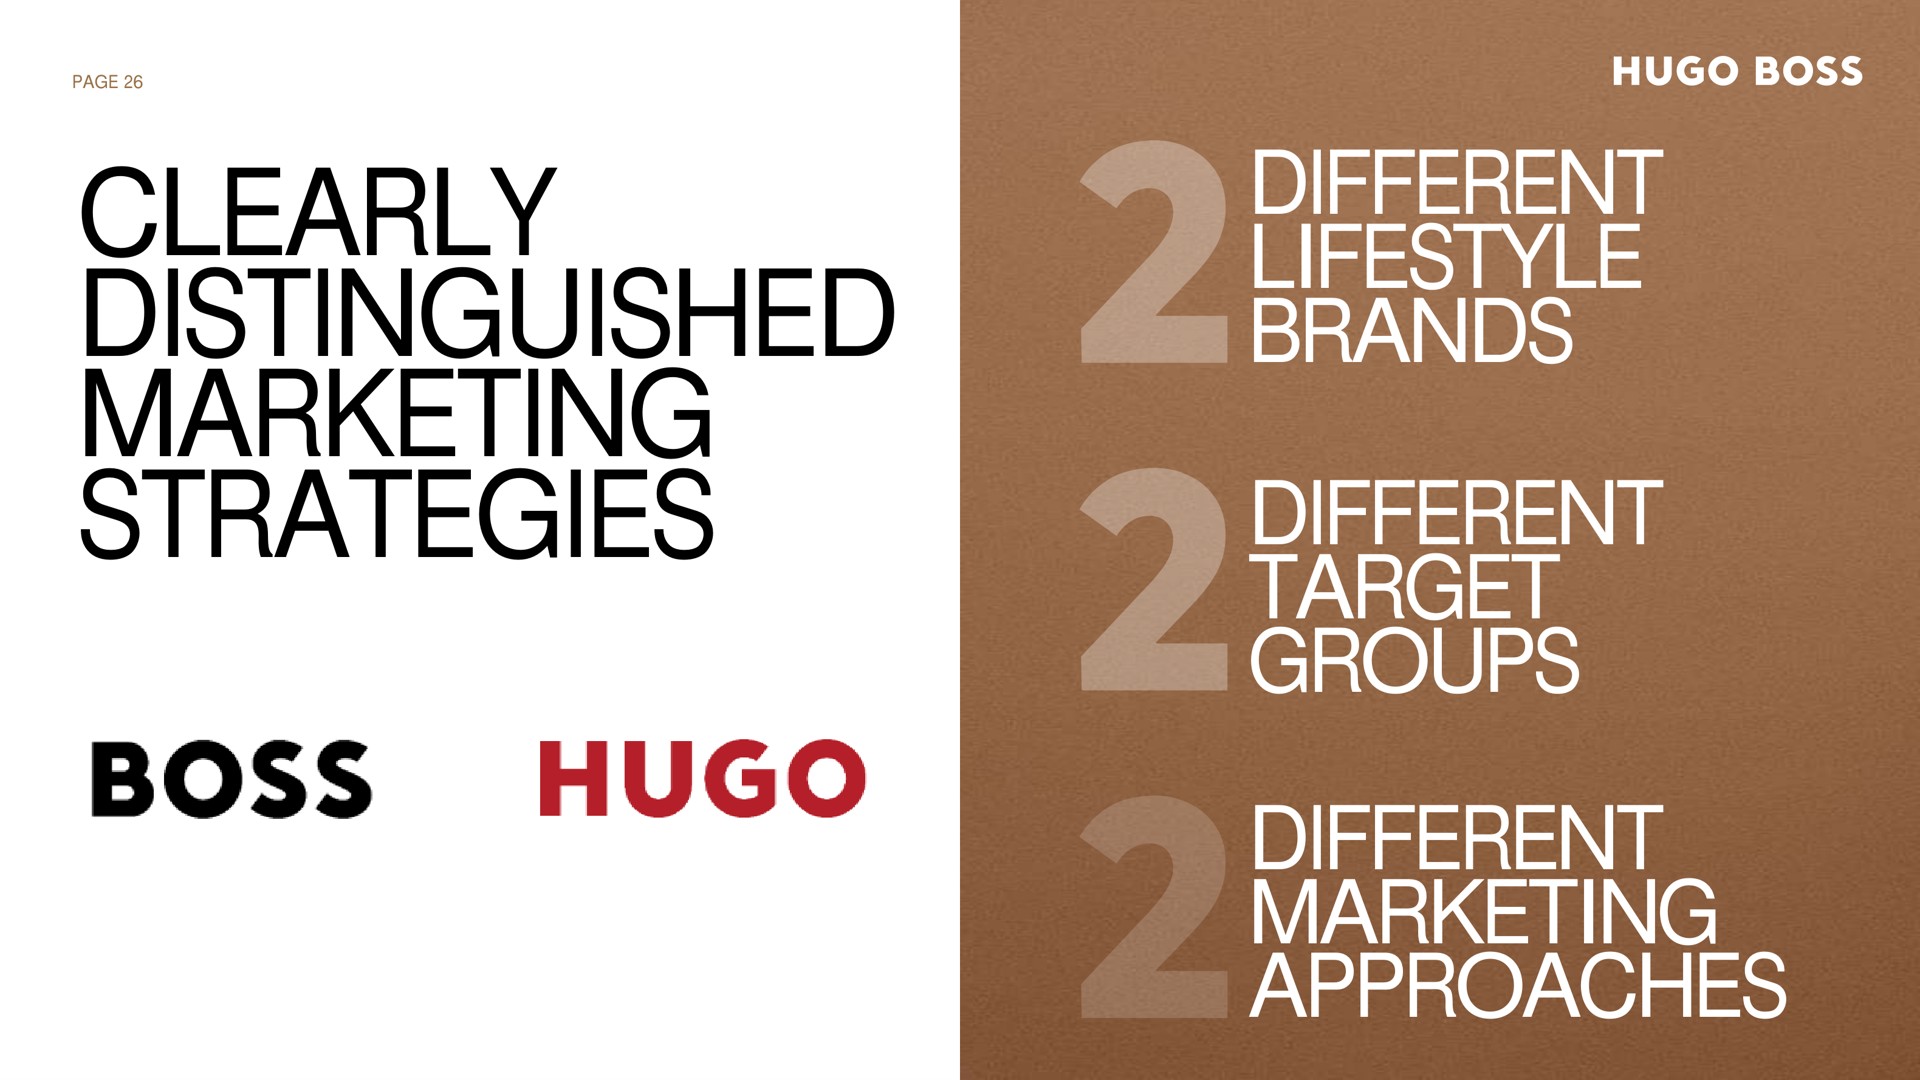 clearly distinguished marketing strategies different brands different target groups different marketing approaches boss sas no eas boss | Hugo Boss